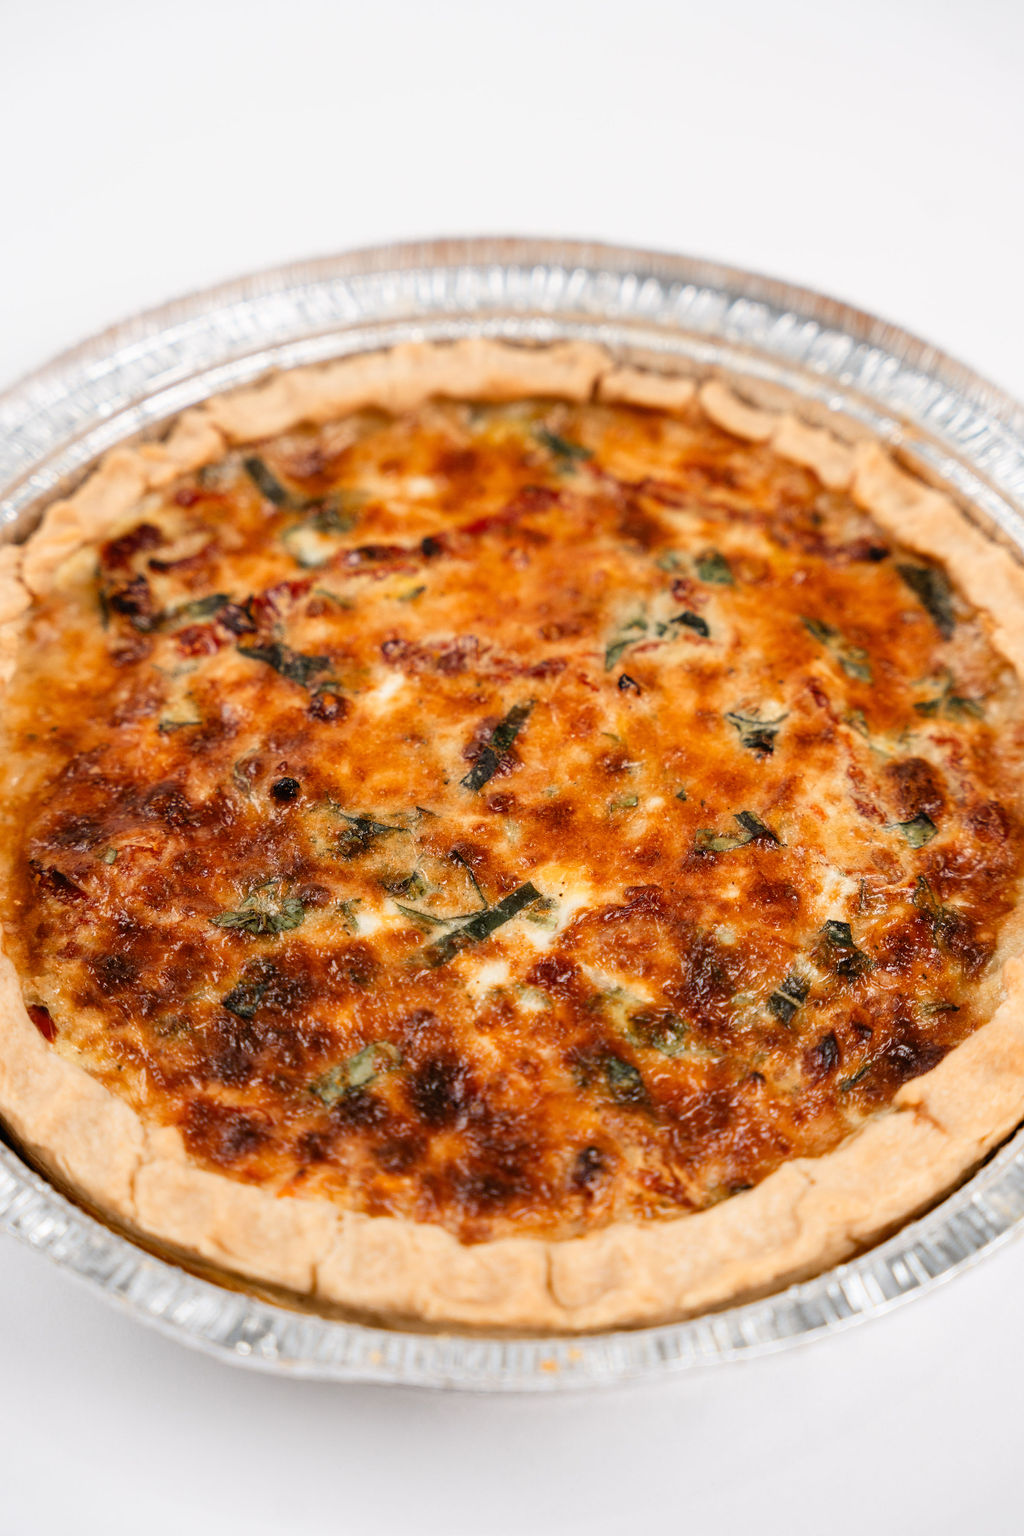 quiche-brunch-and-breakfast-catering-package-scotsdale-kale-chef-service.